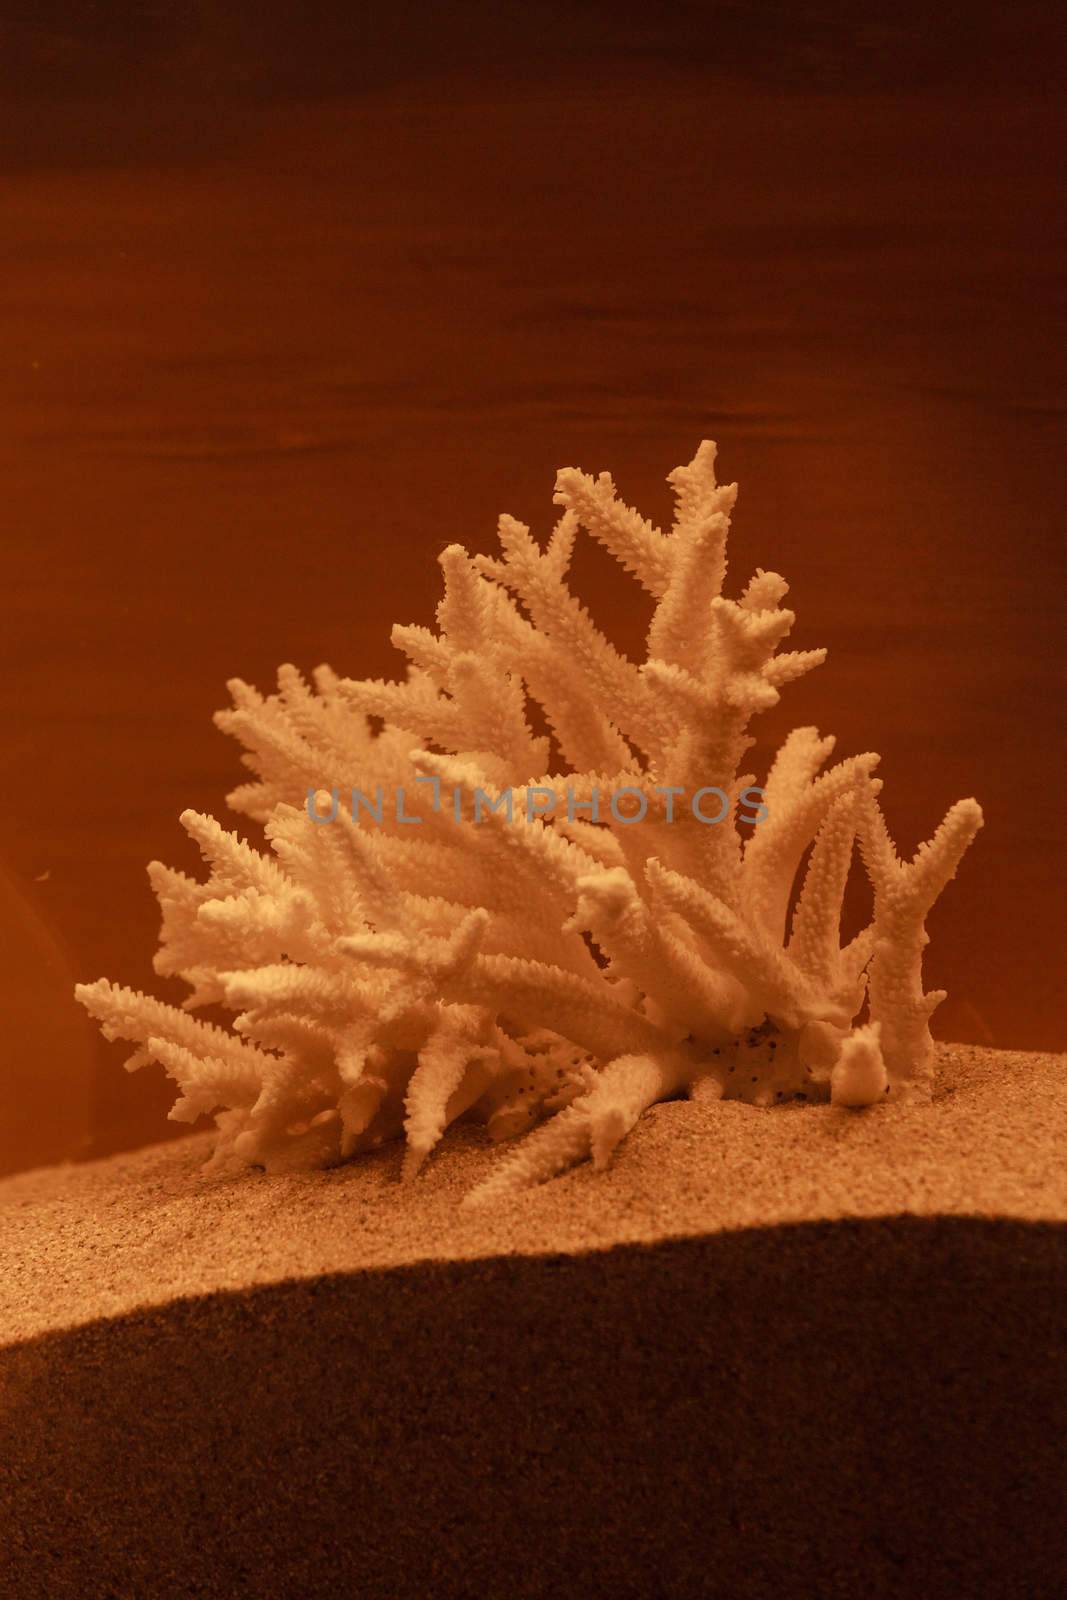 Bleached coral skeleton decor on a bronzed background